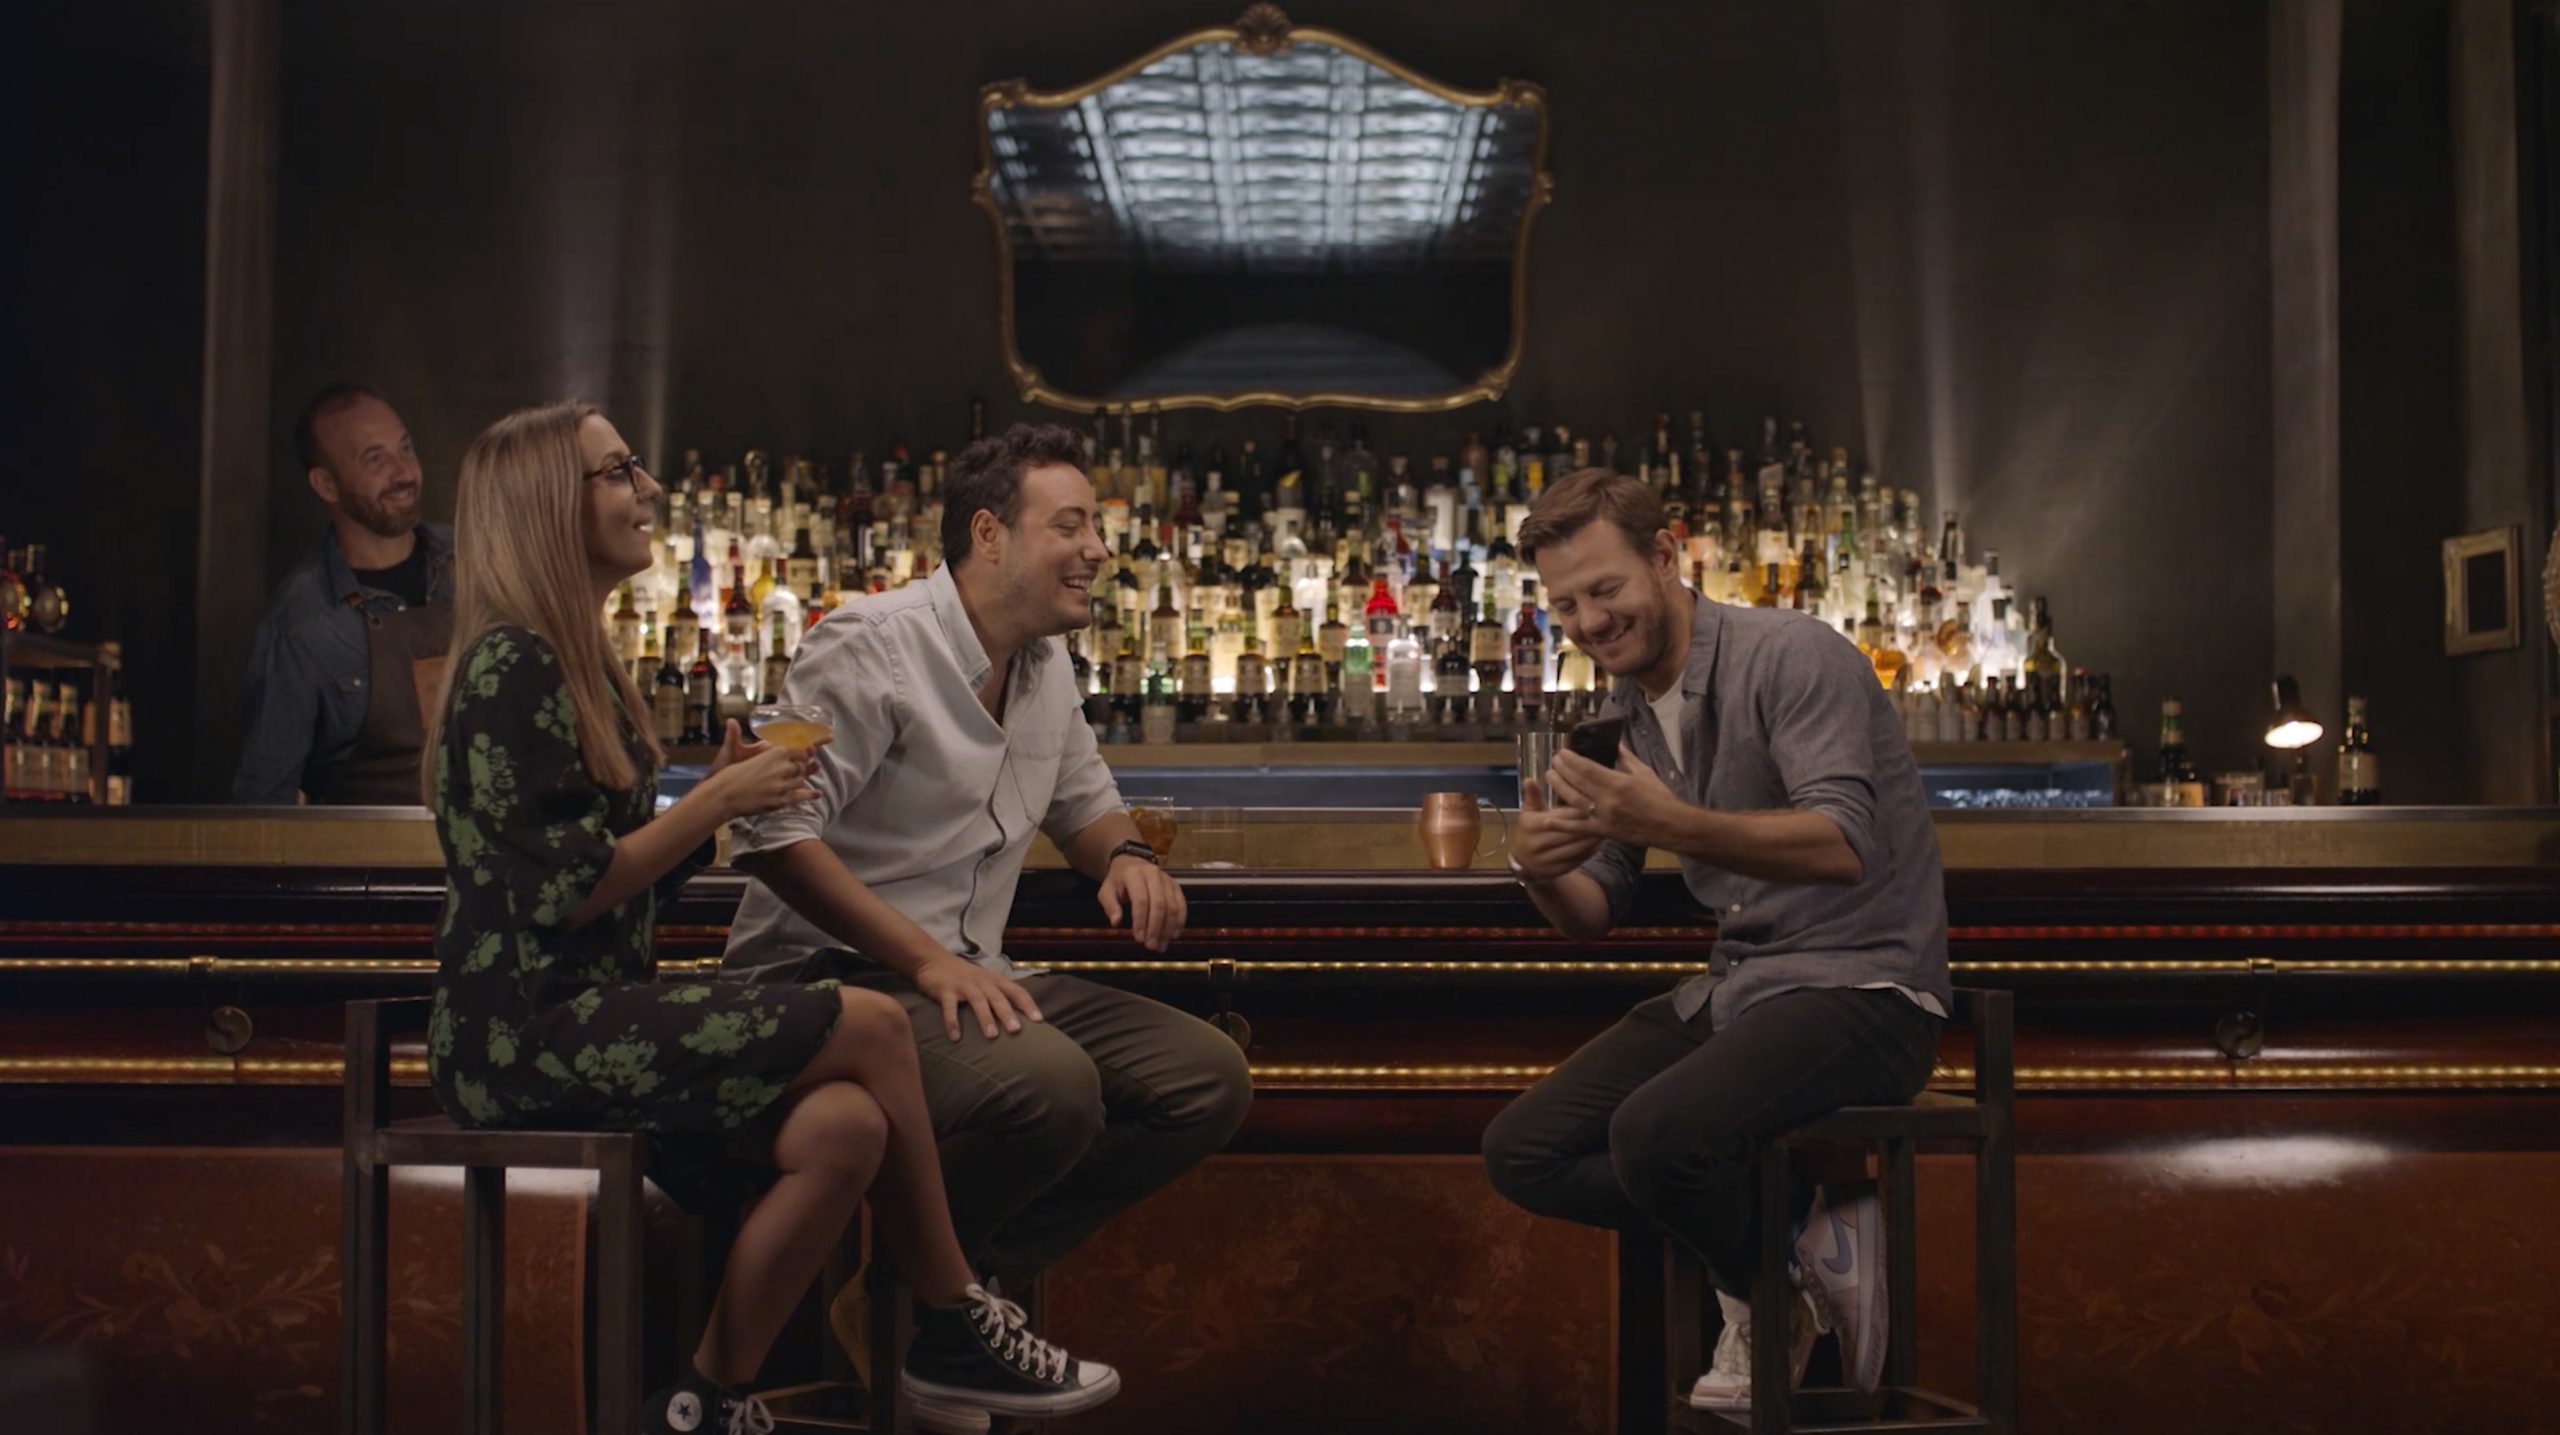 Friendship is centre stage with Amaro Montenegro’s “Pal Around”, the new branded content with Alessandro Cattelan created by Armando Testa